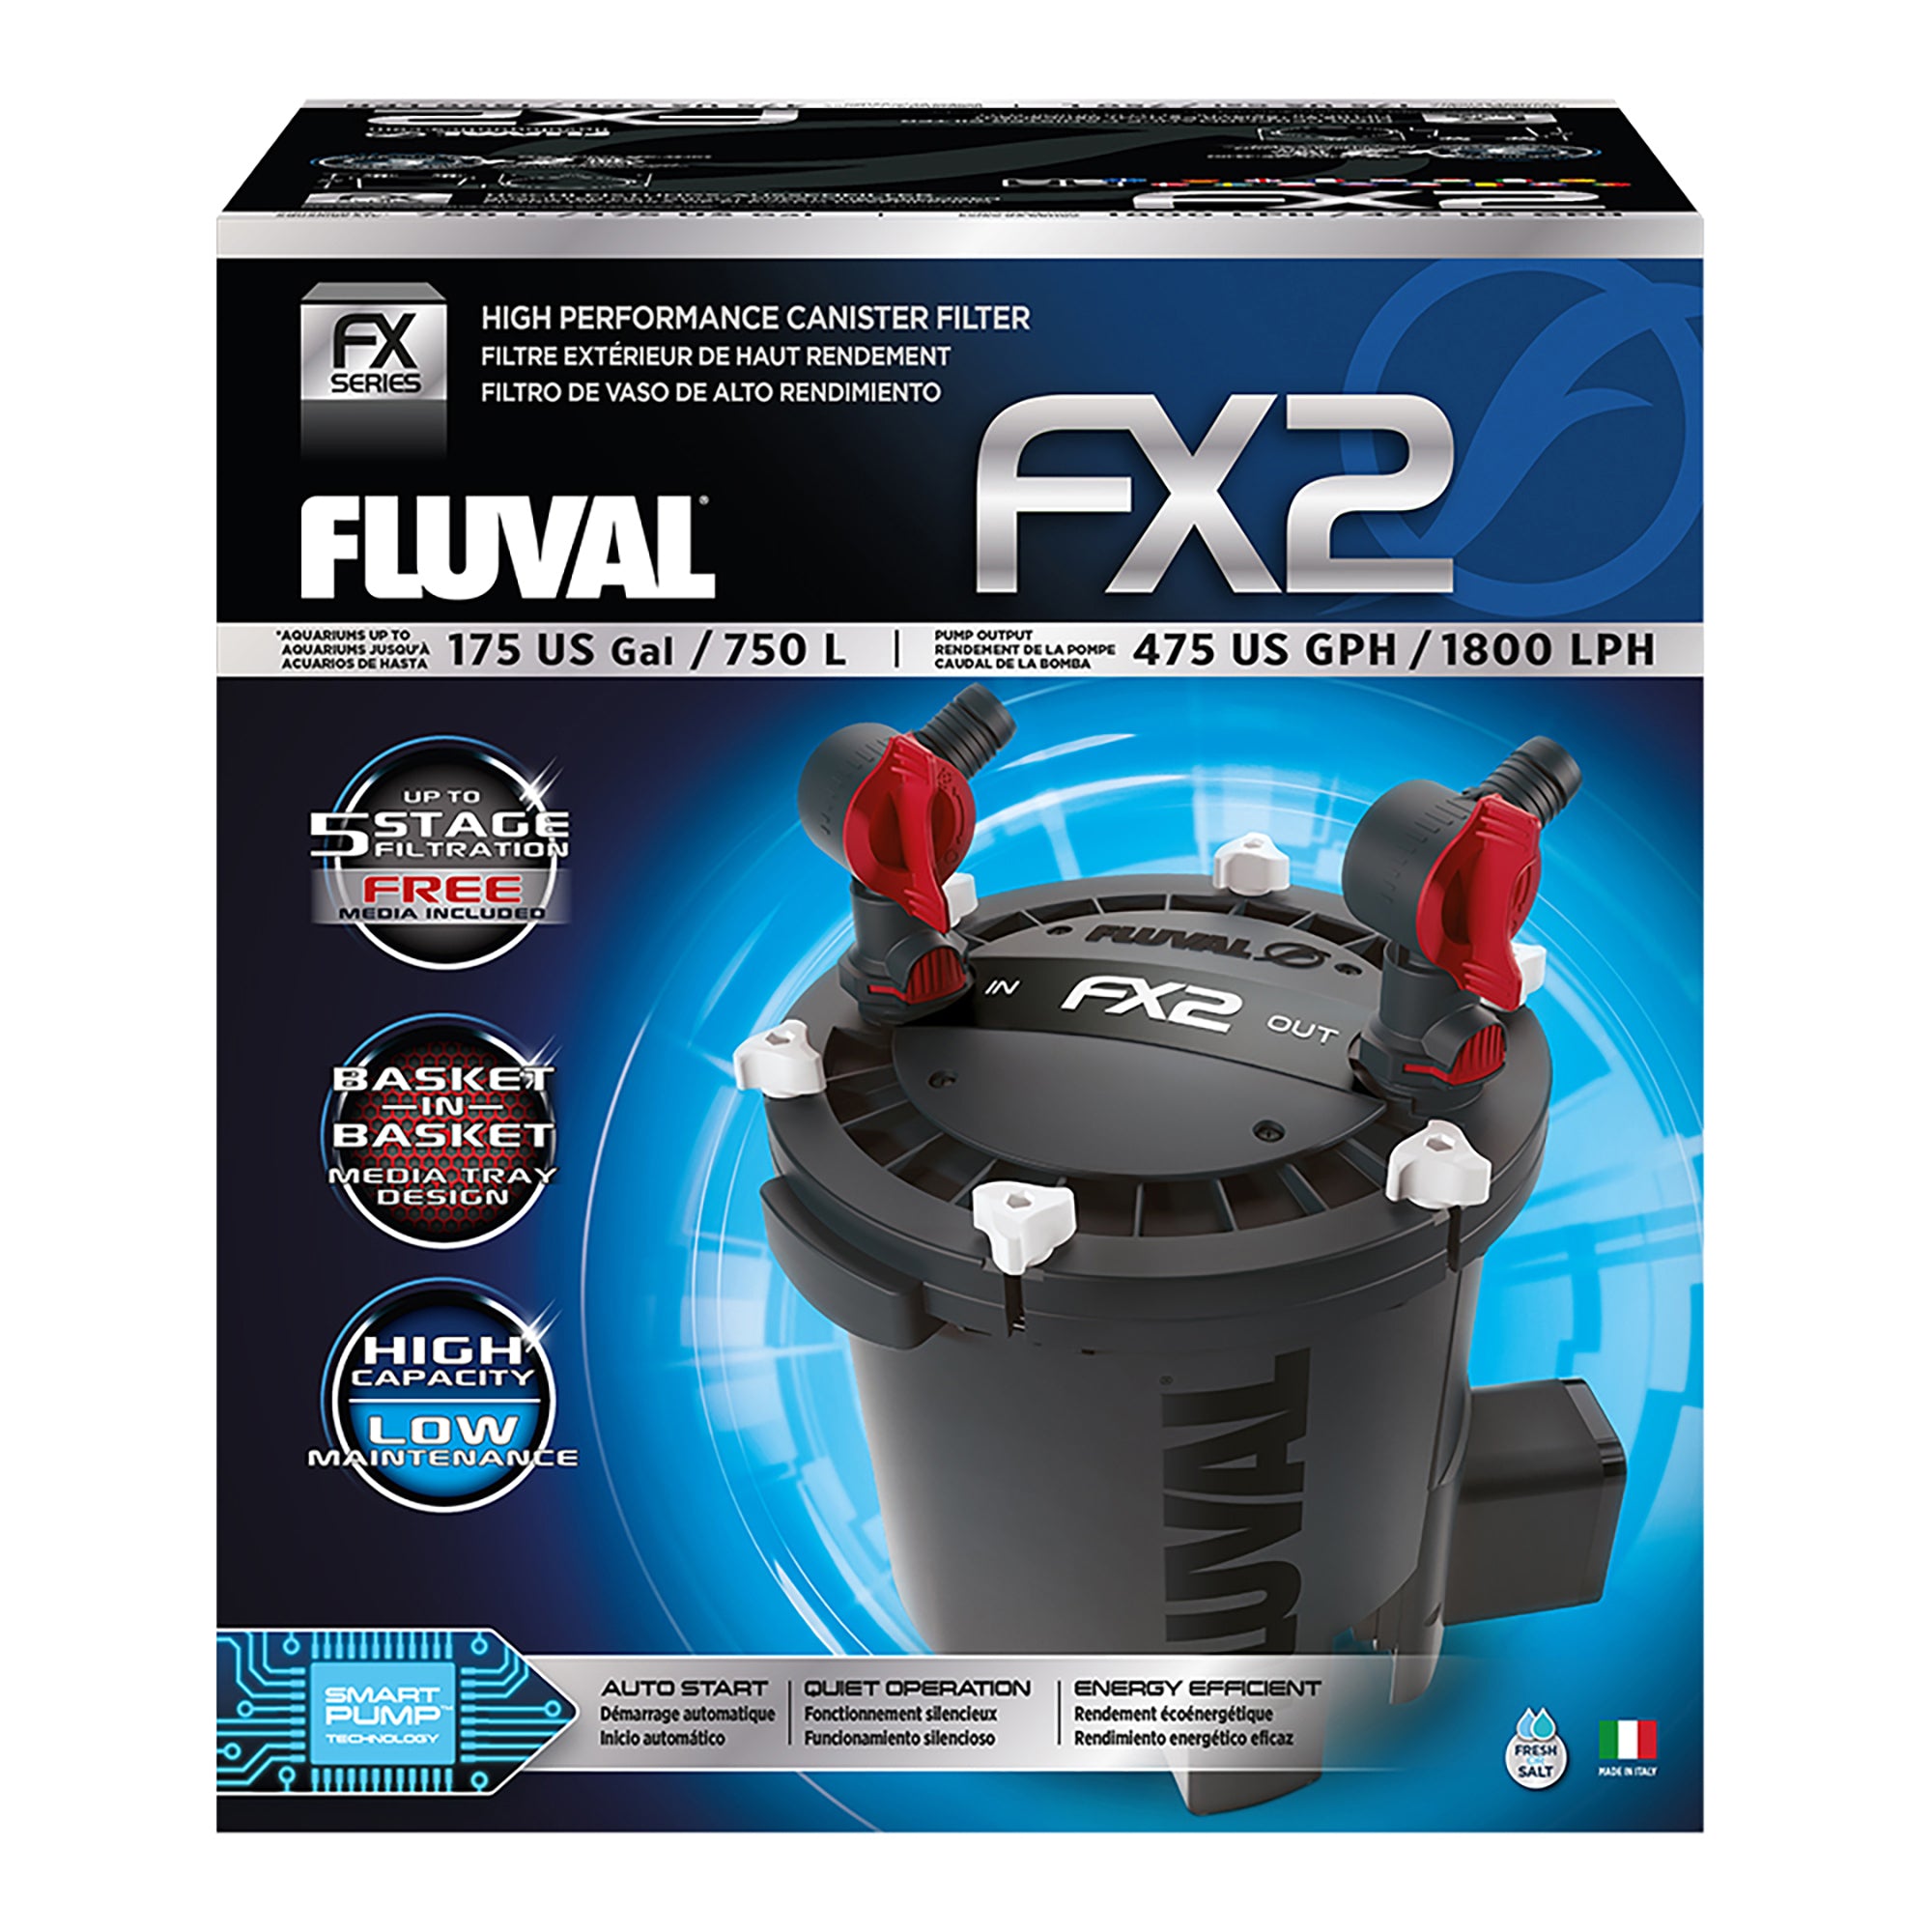 Fluval FX2 High Performance Canister Filter - up to 750 L (175 US gal)